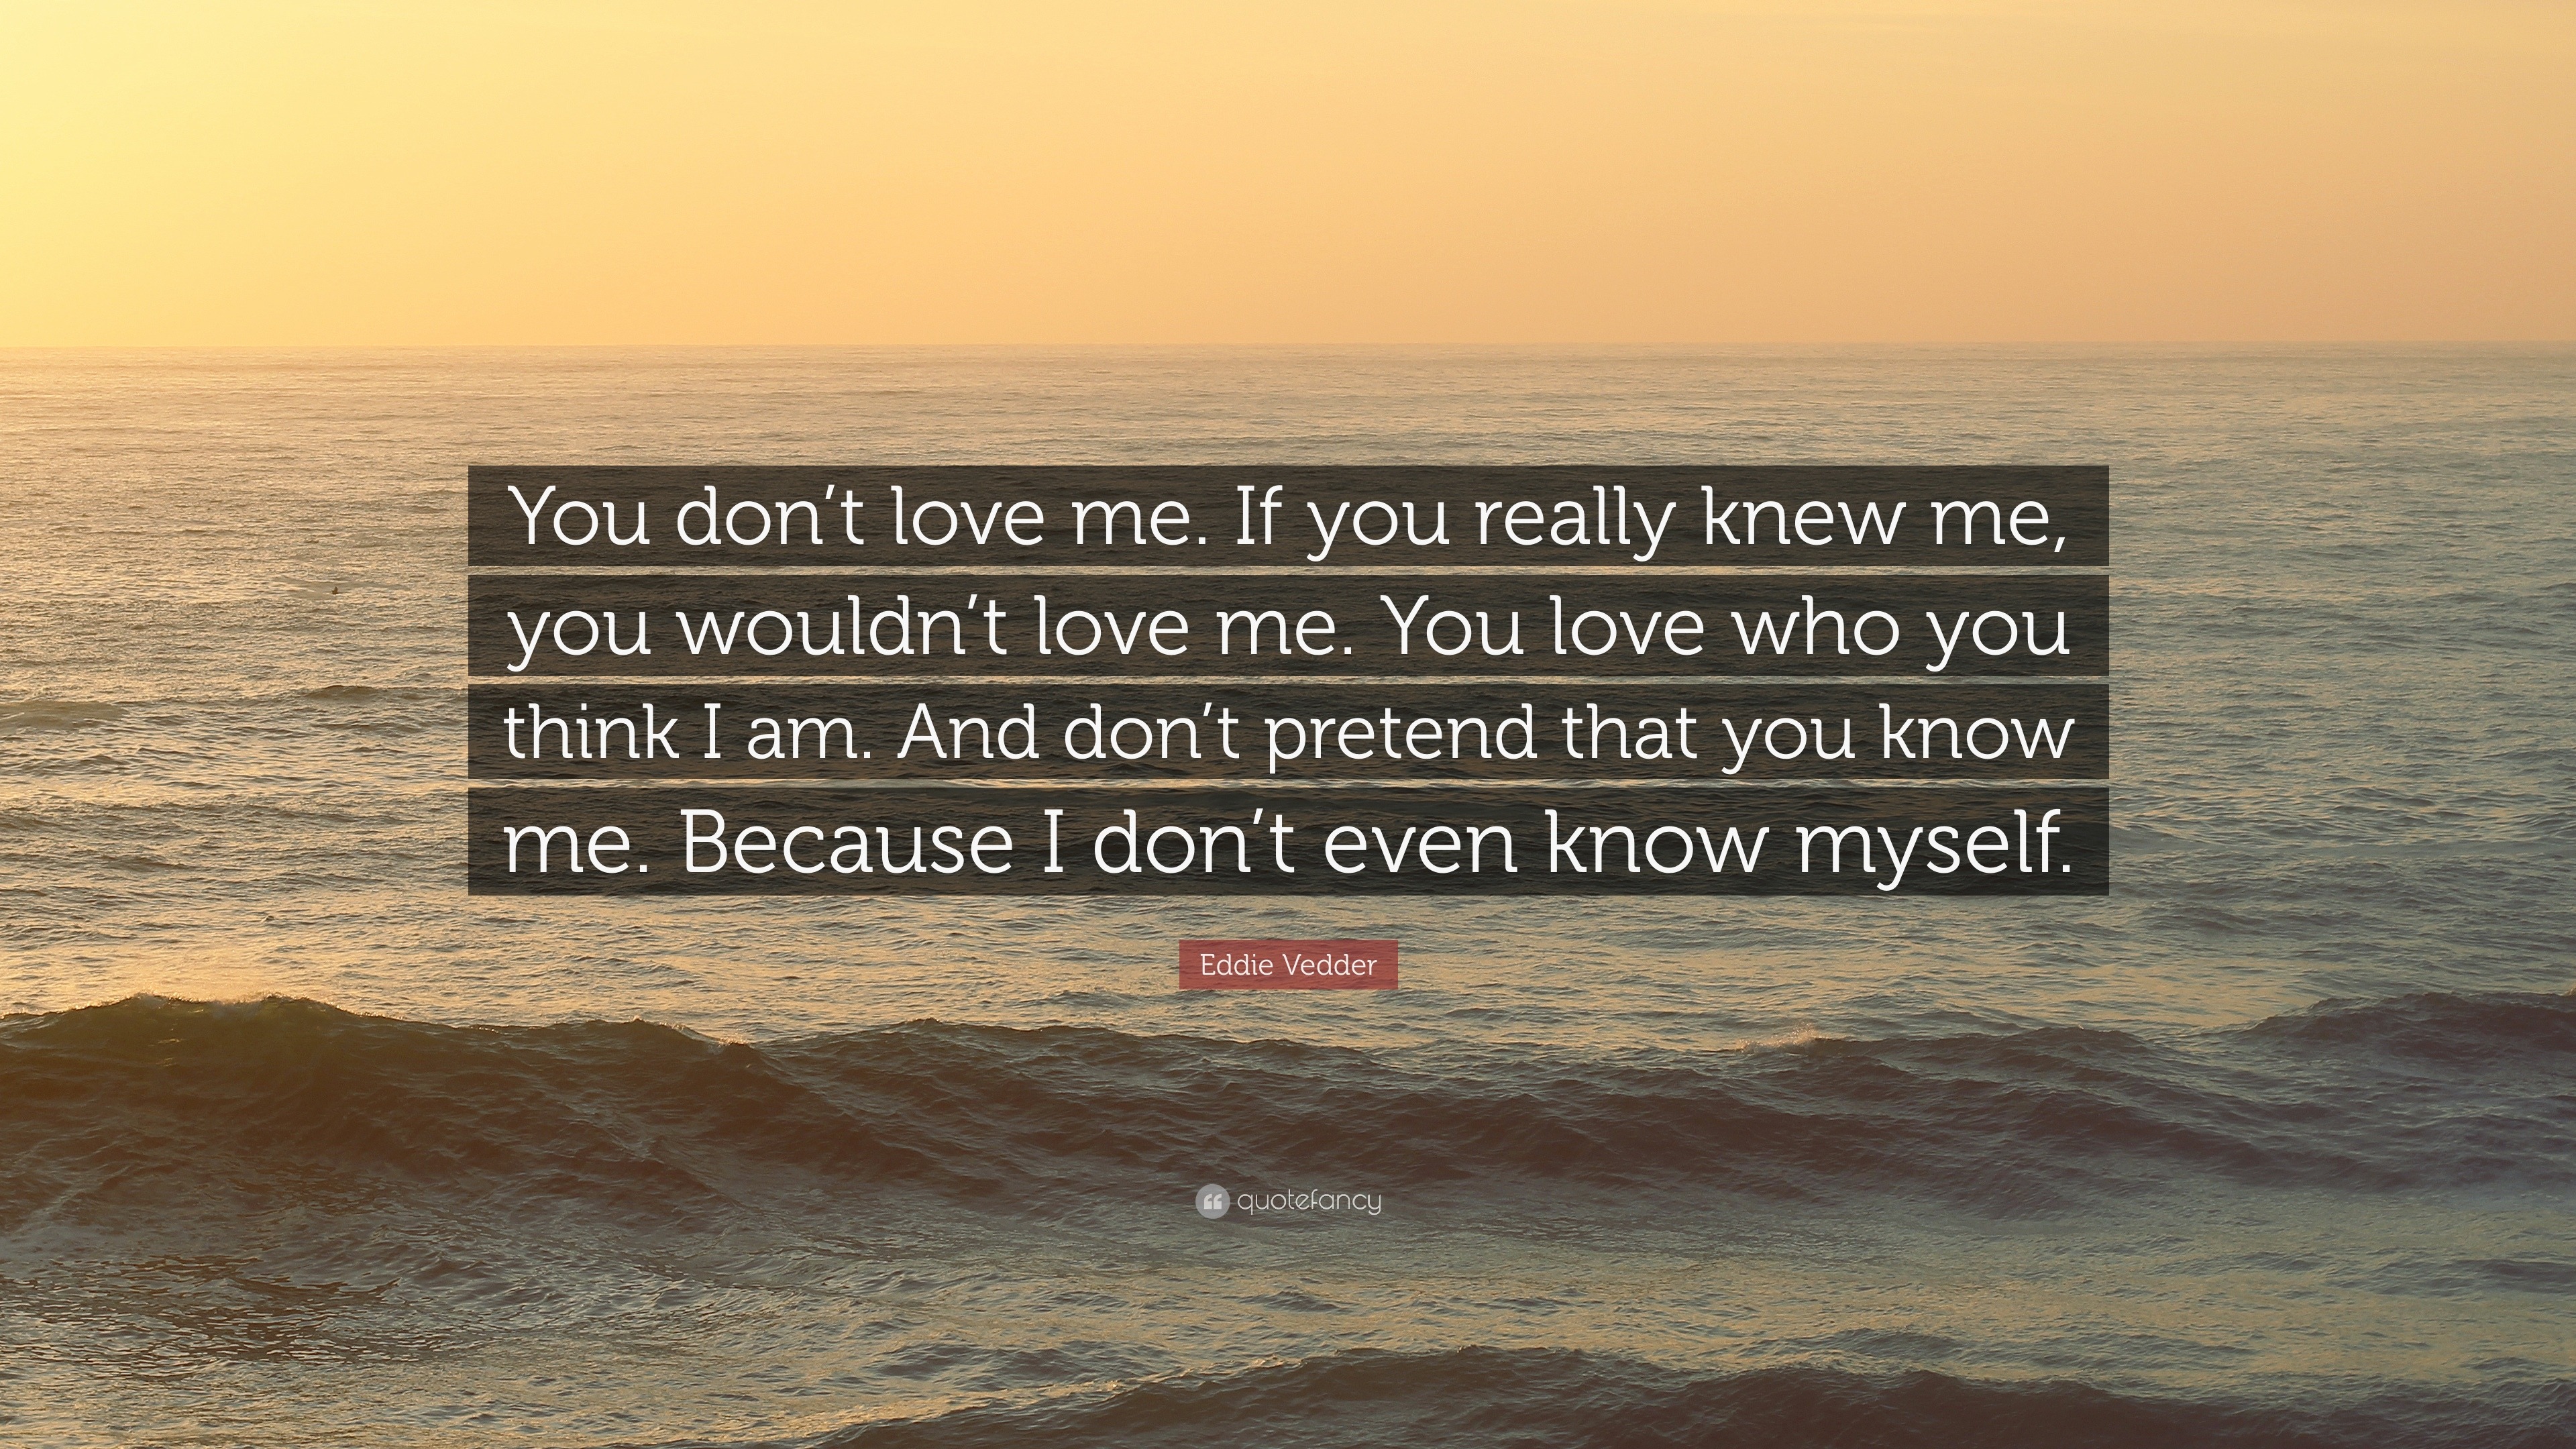 Eddie Vedder Quote: “You Don't Love Me. If You Really Knew Me, You Wouldn't Love Me. You Love Who You Think I Am. And Don't Pretend That You ...”